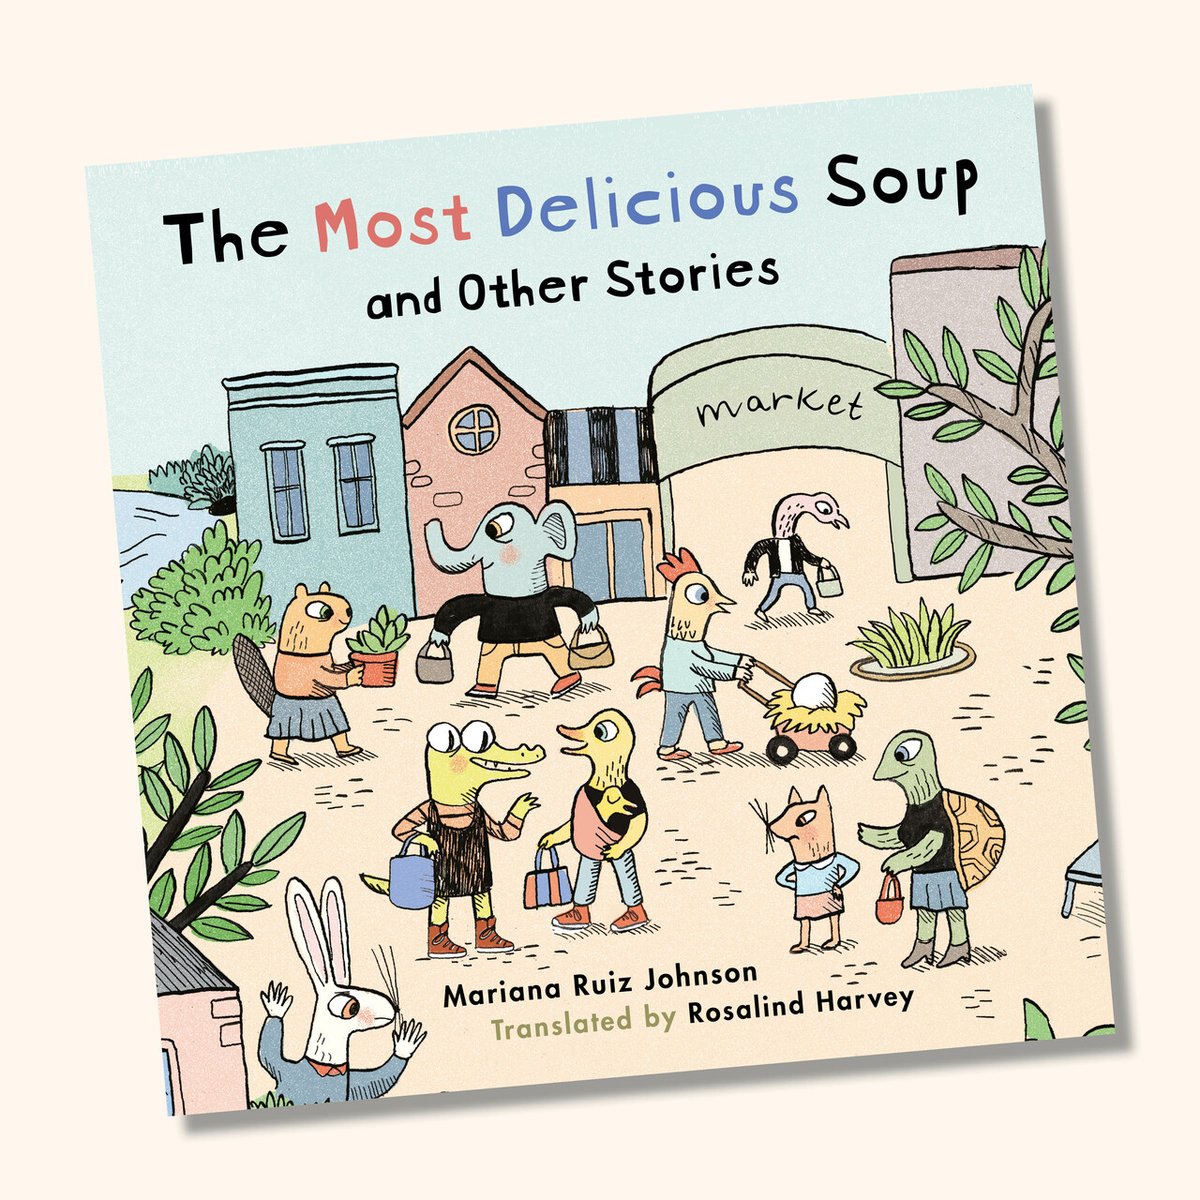 We are delighted to announce our tasty new picture book, The Most Delicious Soup and Other Stories, writted and illustrated by Mariana Ruiz Johnson and translated by Rosalind Harvey. The Most Delicious Soup and Other Stories will be in stores this October.